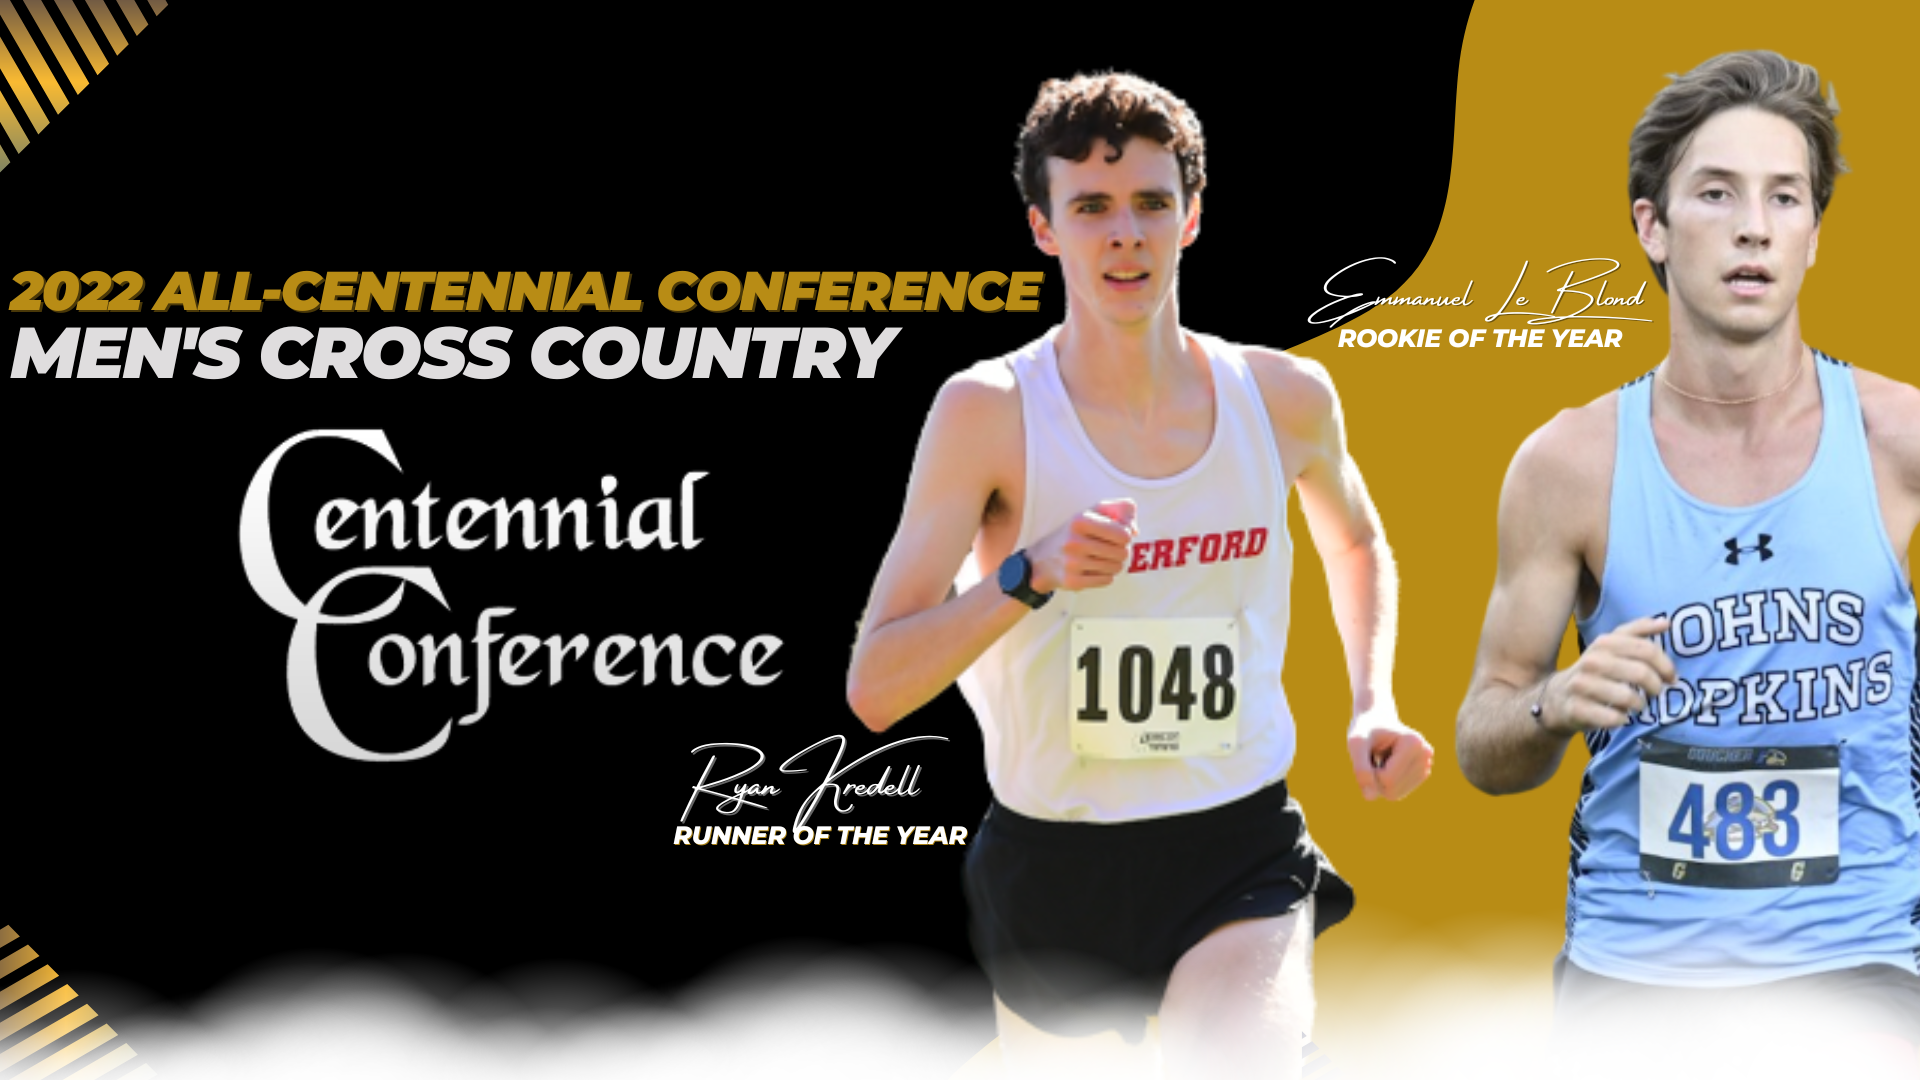 All-CC Men's Cross Country: Haverford's Kredell Tabbed Runner of the Year